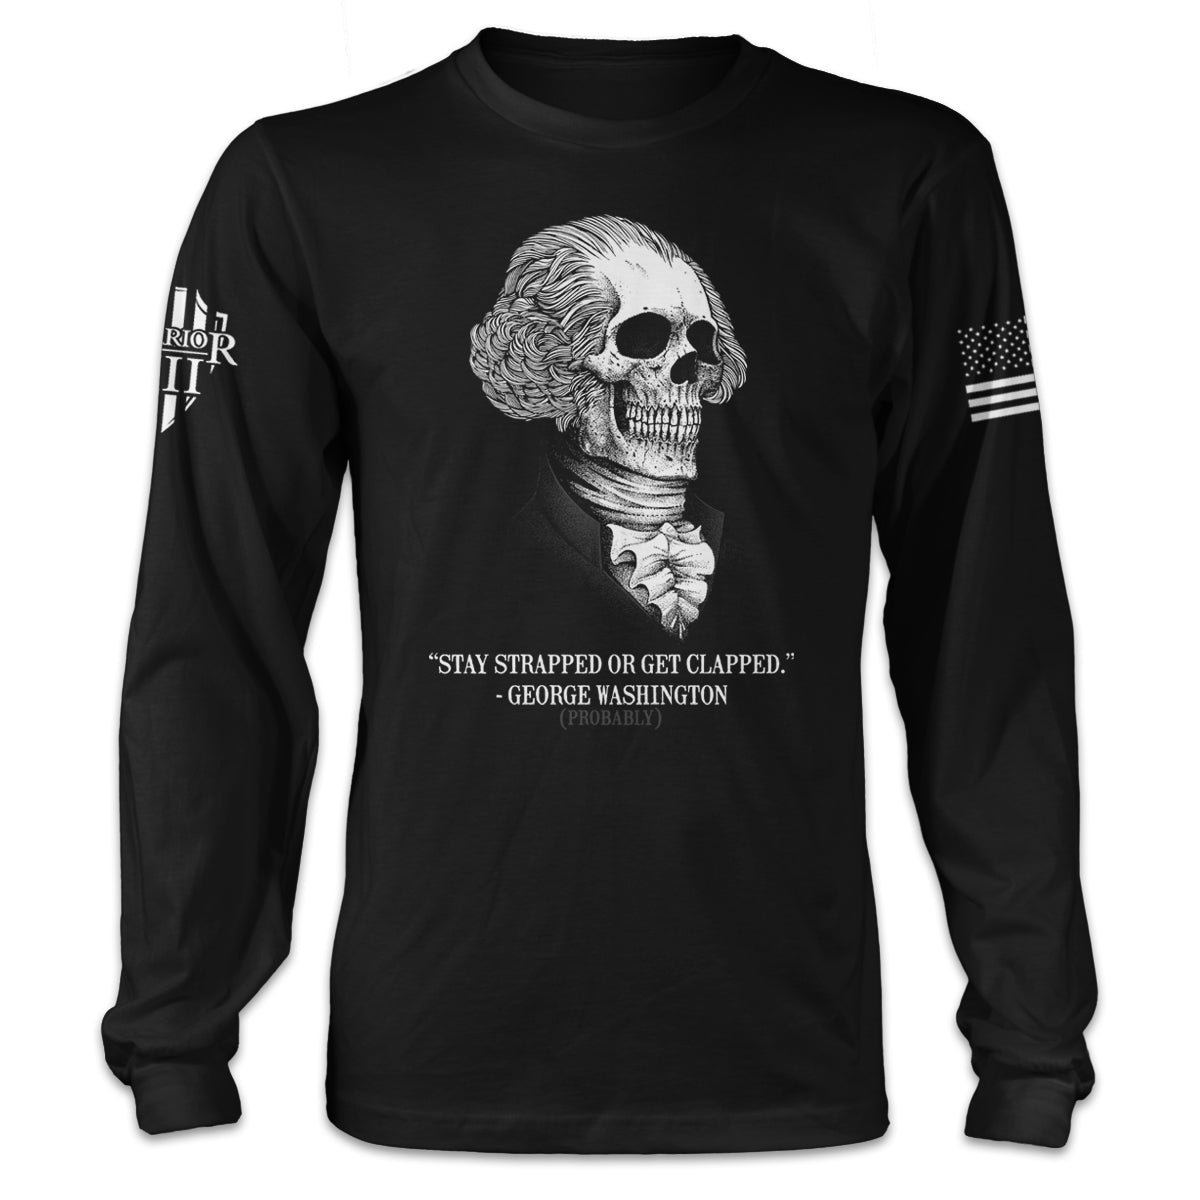 A black long sleeve shirt with the words "Stay strapped, or get clapped." - George Washington (probably)" and a George Washington skull.